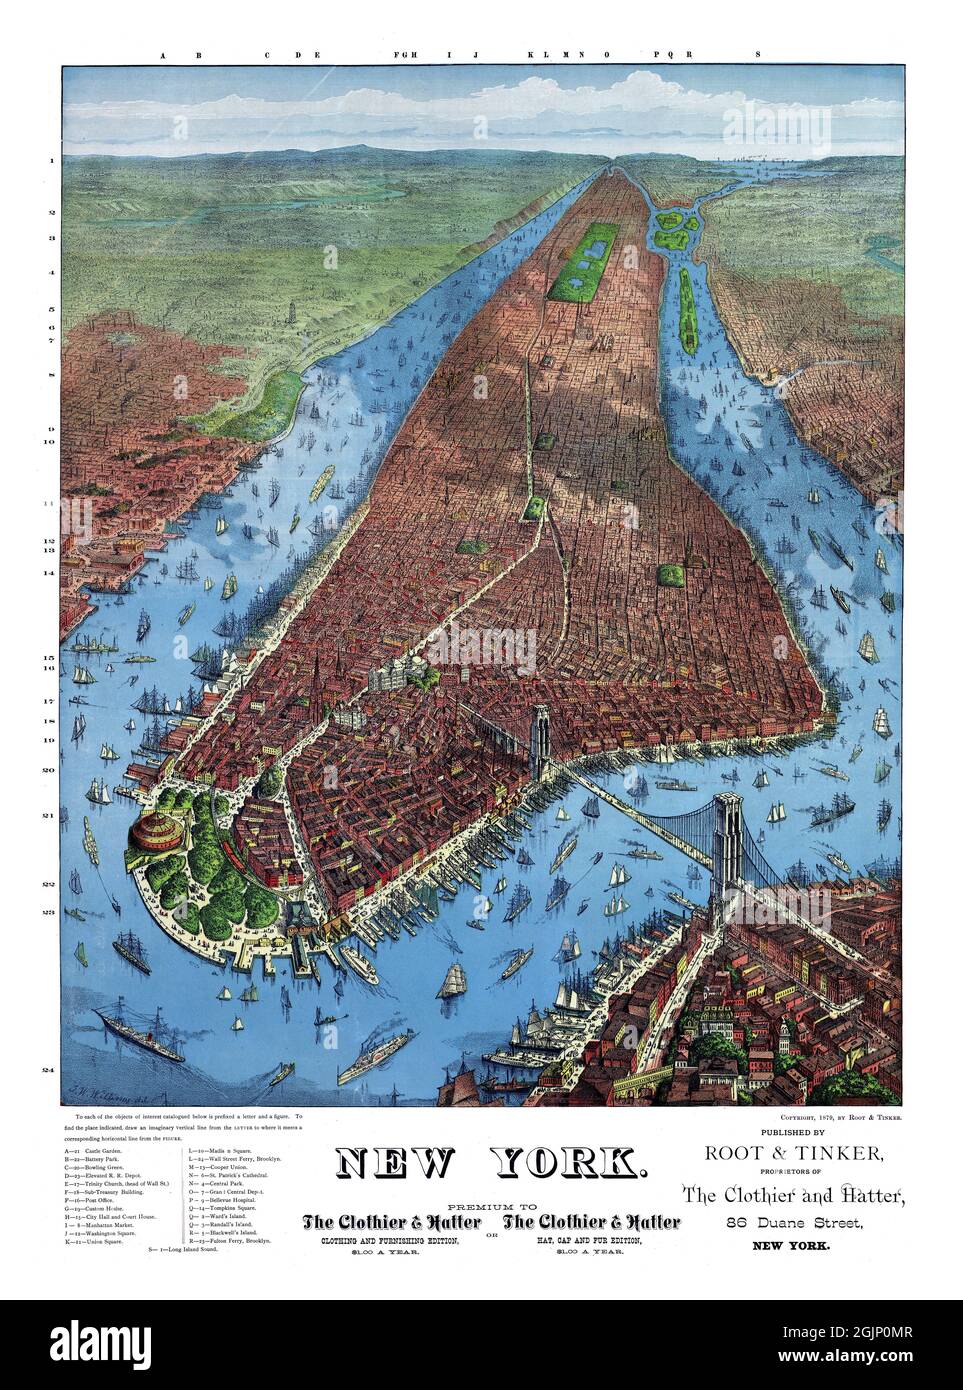 Perspective map of New York not drawn to scale by J. W. Williams. Restored vintage poster published by Root & Tinker, New York in 1879. Stock Photo